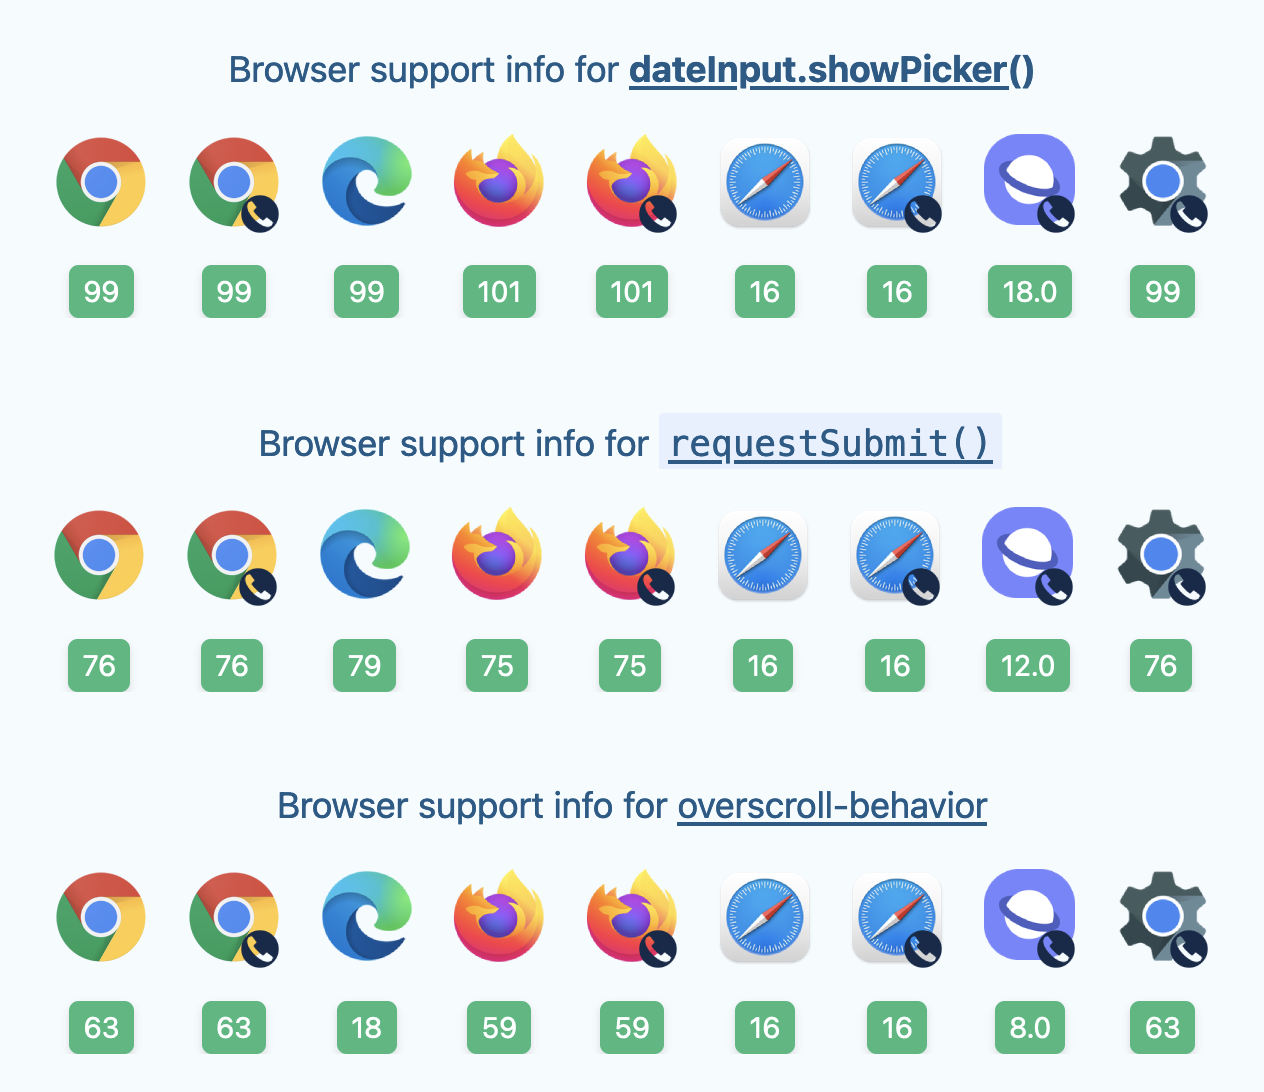 Browser support info for requestSubmit, showPicker and overscroll=behavior